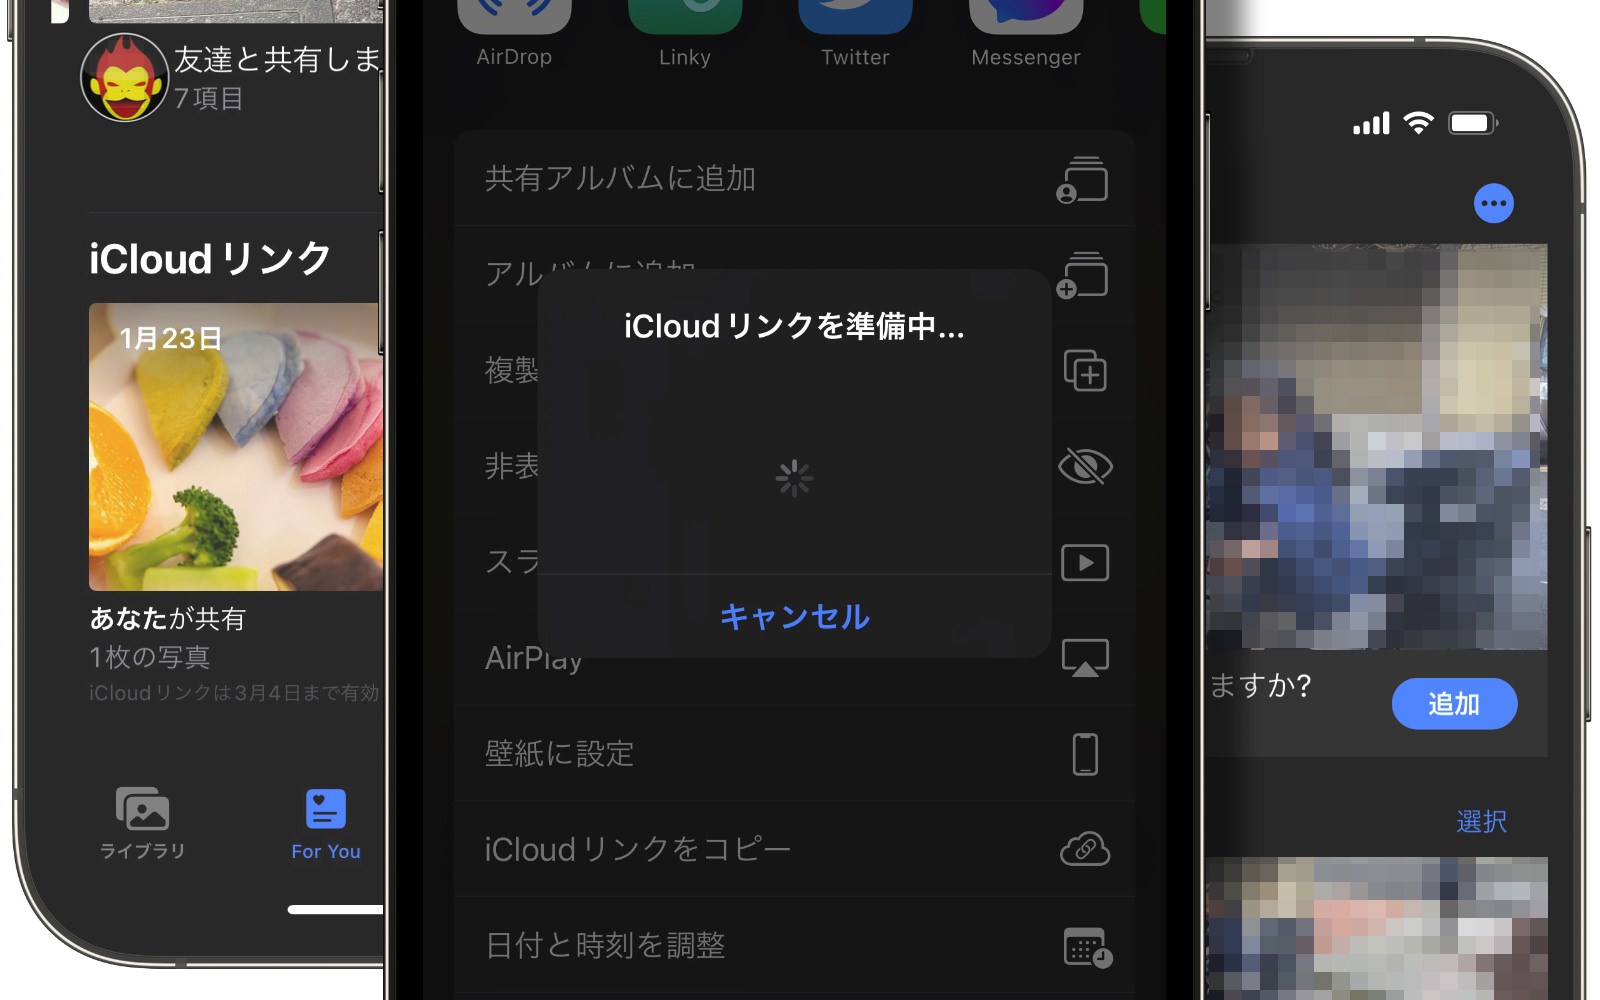 How To Use iCloud Link